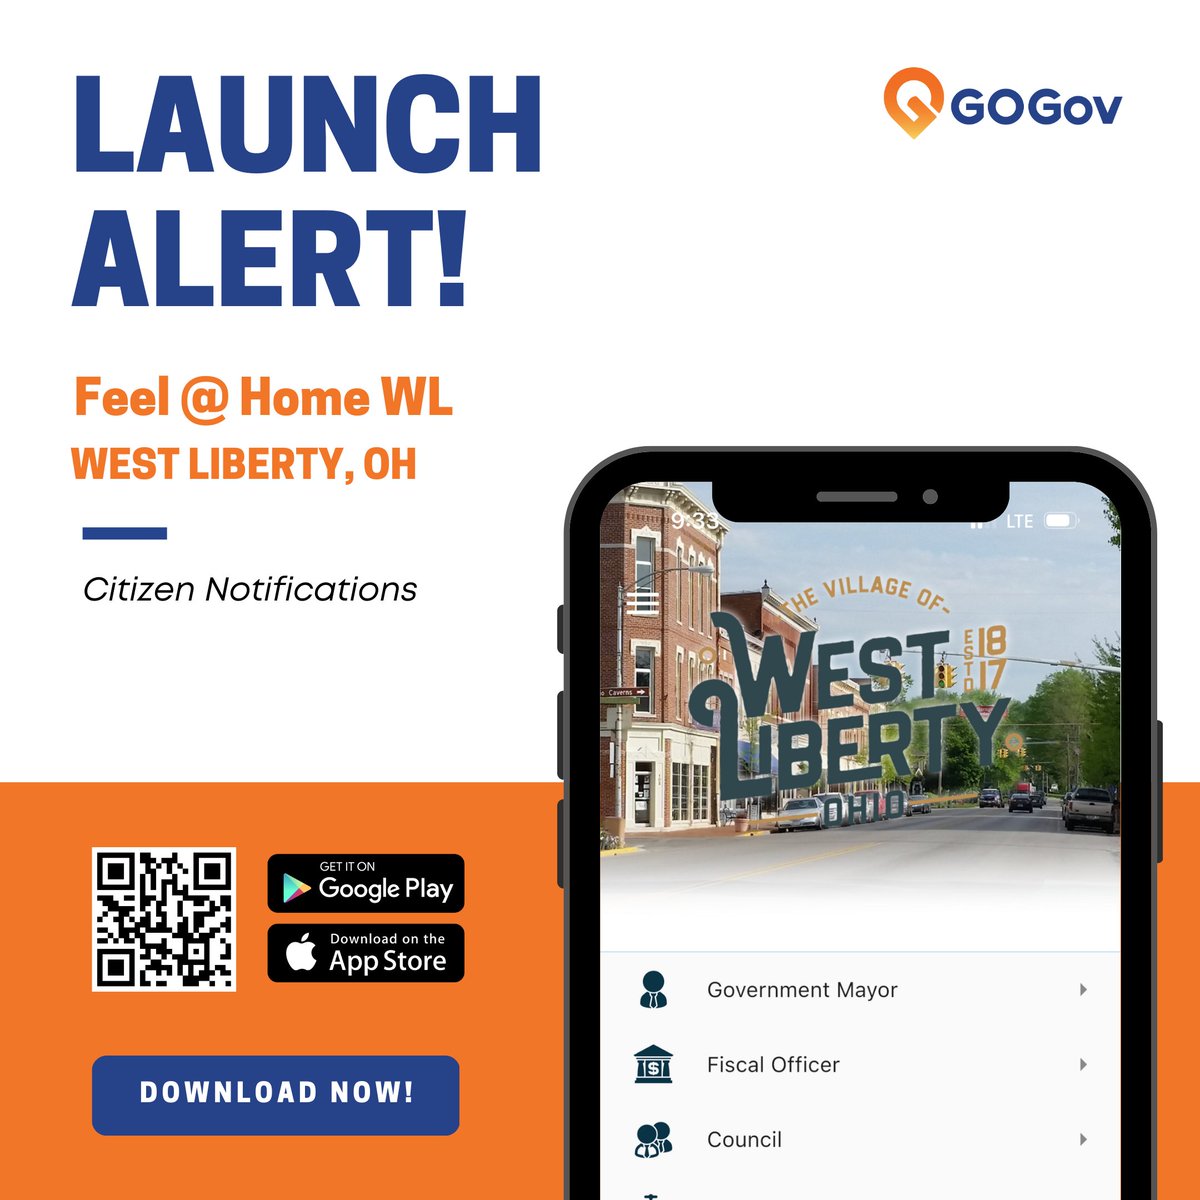 Launch Alert! West Liberty, OH has launched Citizen Notifications and a new mobile app, Feel @ Home WL, developed by @GOGovApps.  

Citizen Notifications lets West Liberty connect with residents through a mobile app.   

#westliberty #Ohio #GOGovLaunch